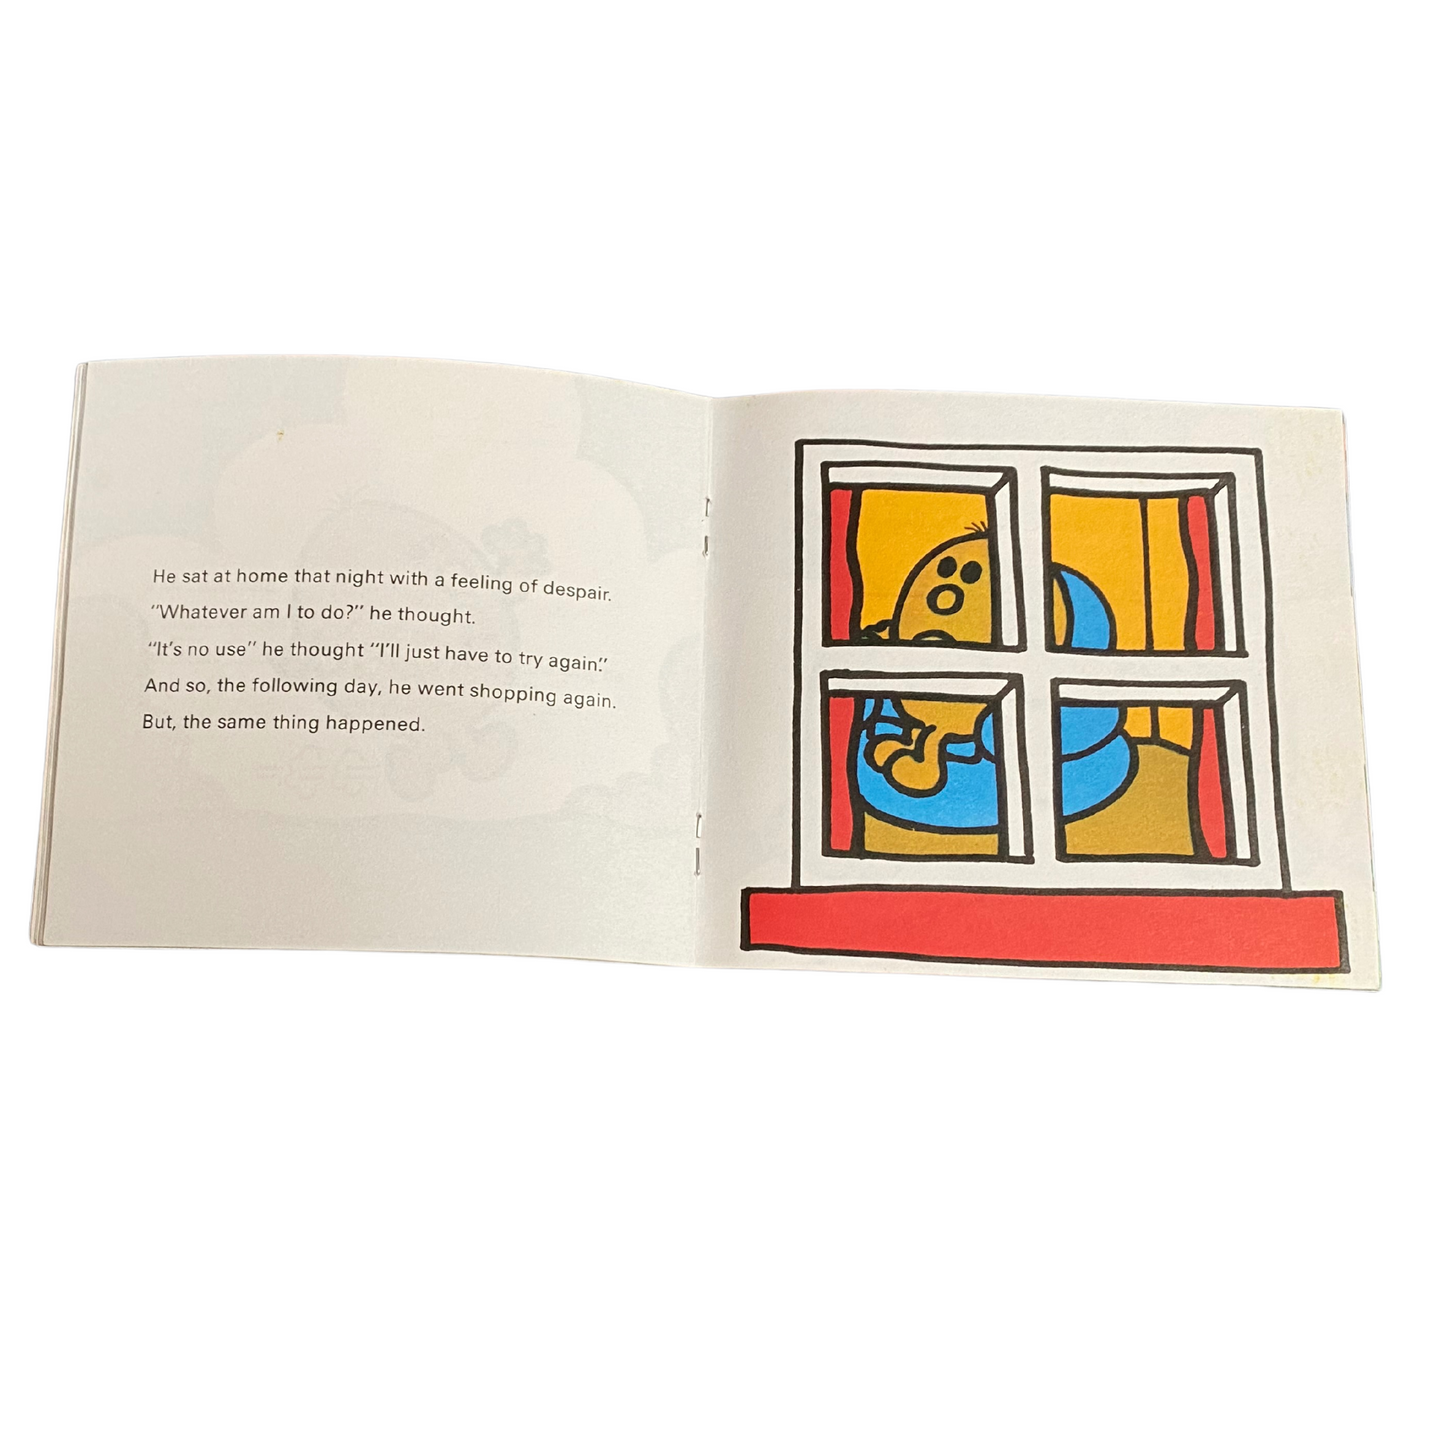 Collectible  Mr Quiet book  - Original 1970s Roger Hargreaves Edition